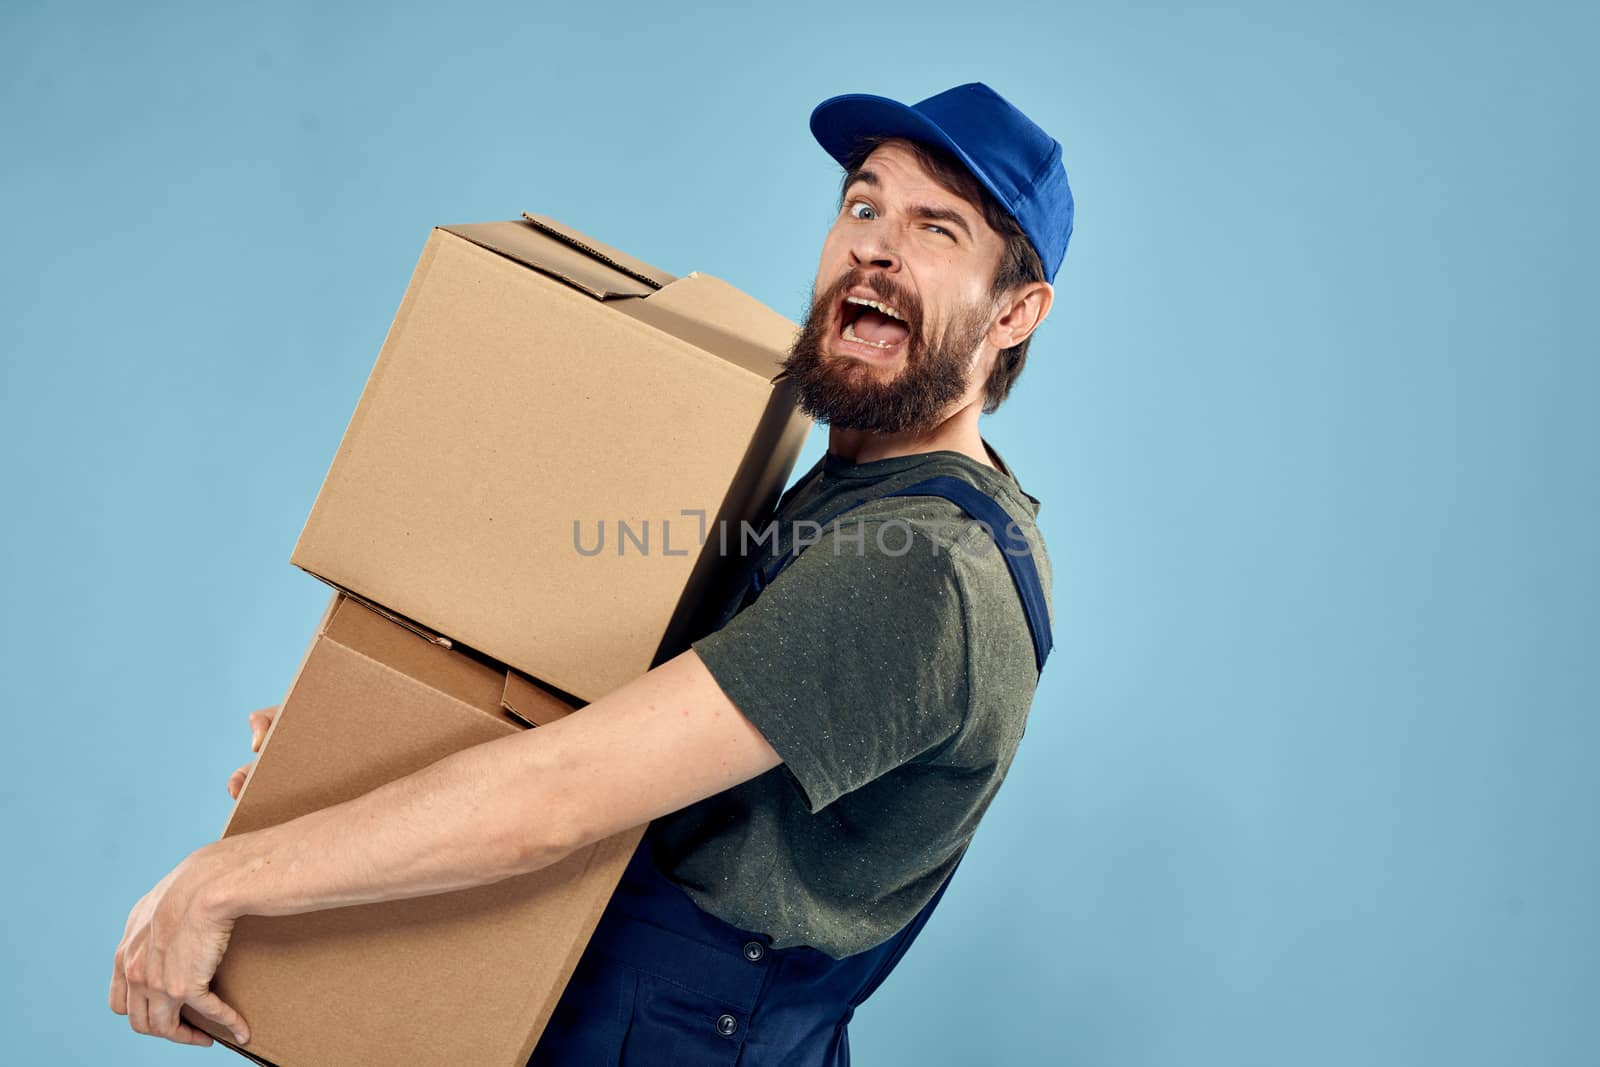 Man in working uniform with boxes in hands delivery service blue background by SHOTPRIME